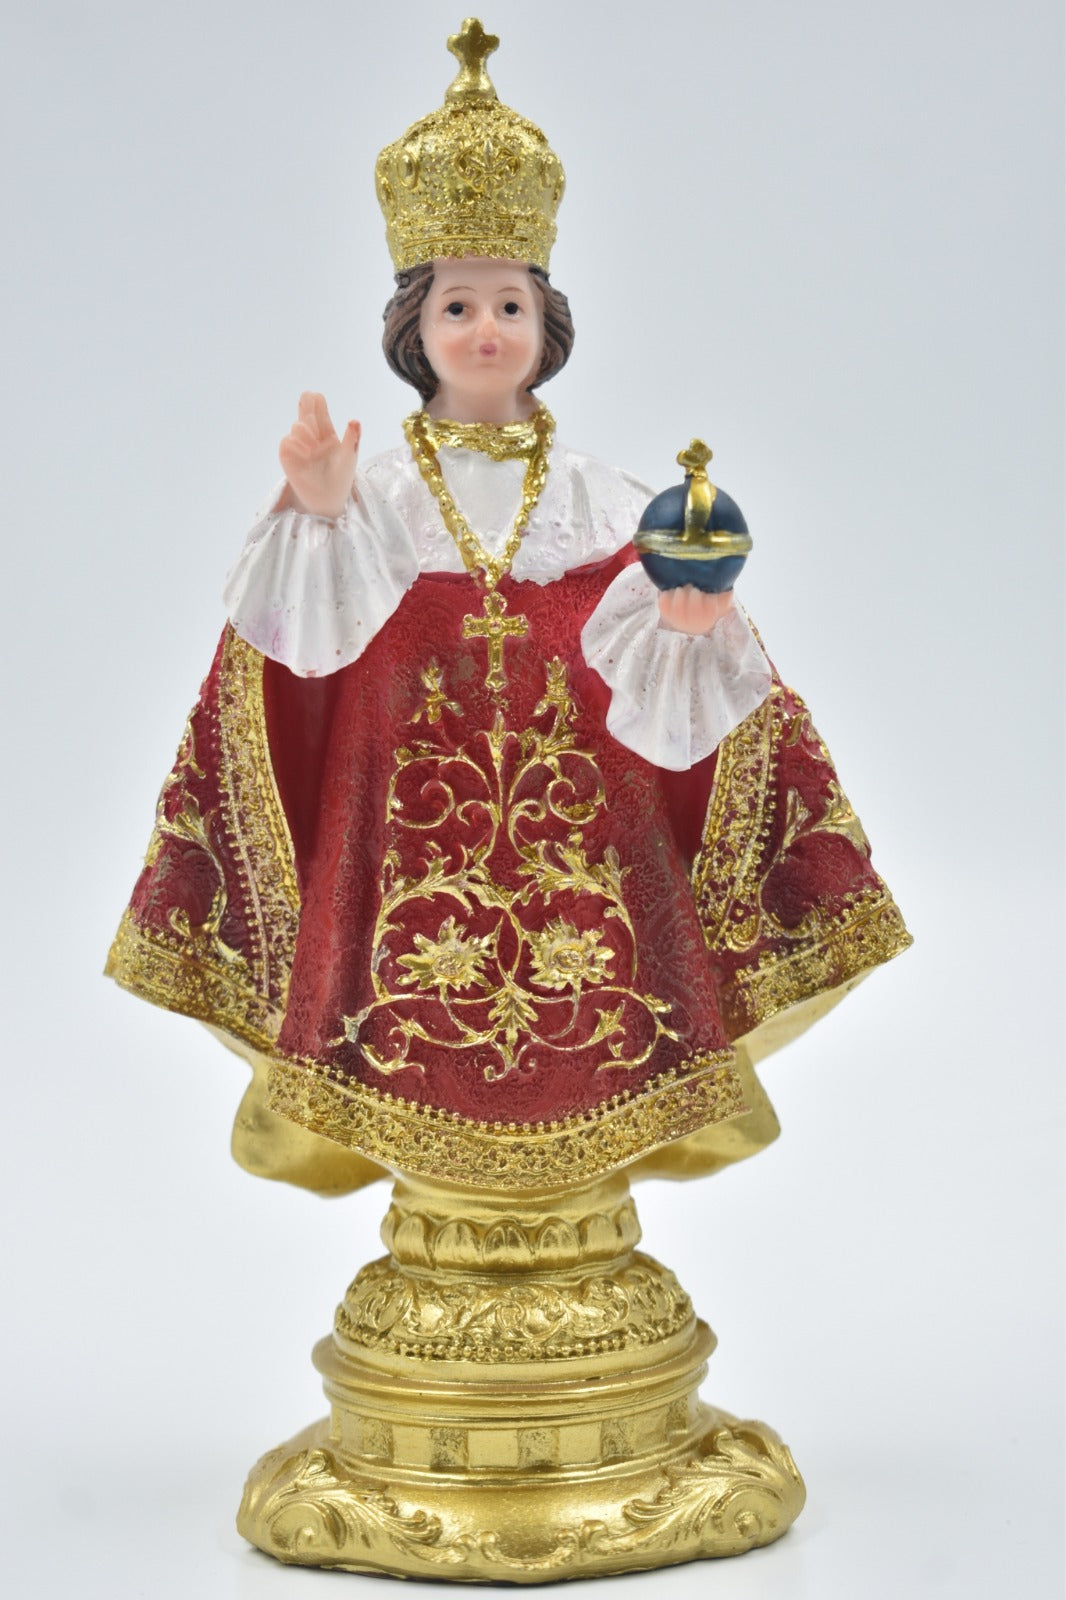  Infant Jesus 8 Inch Statue - A Symbol of Innocence and Divine Love